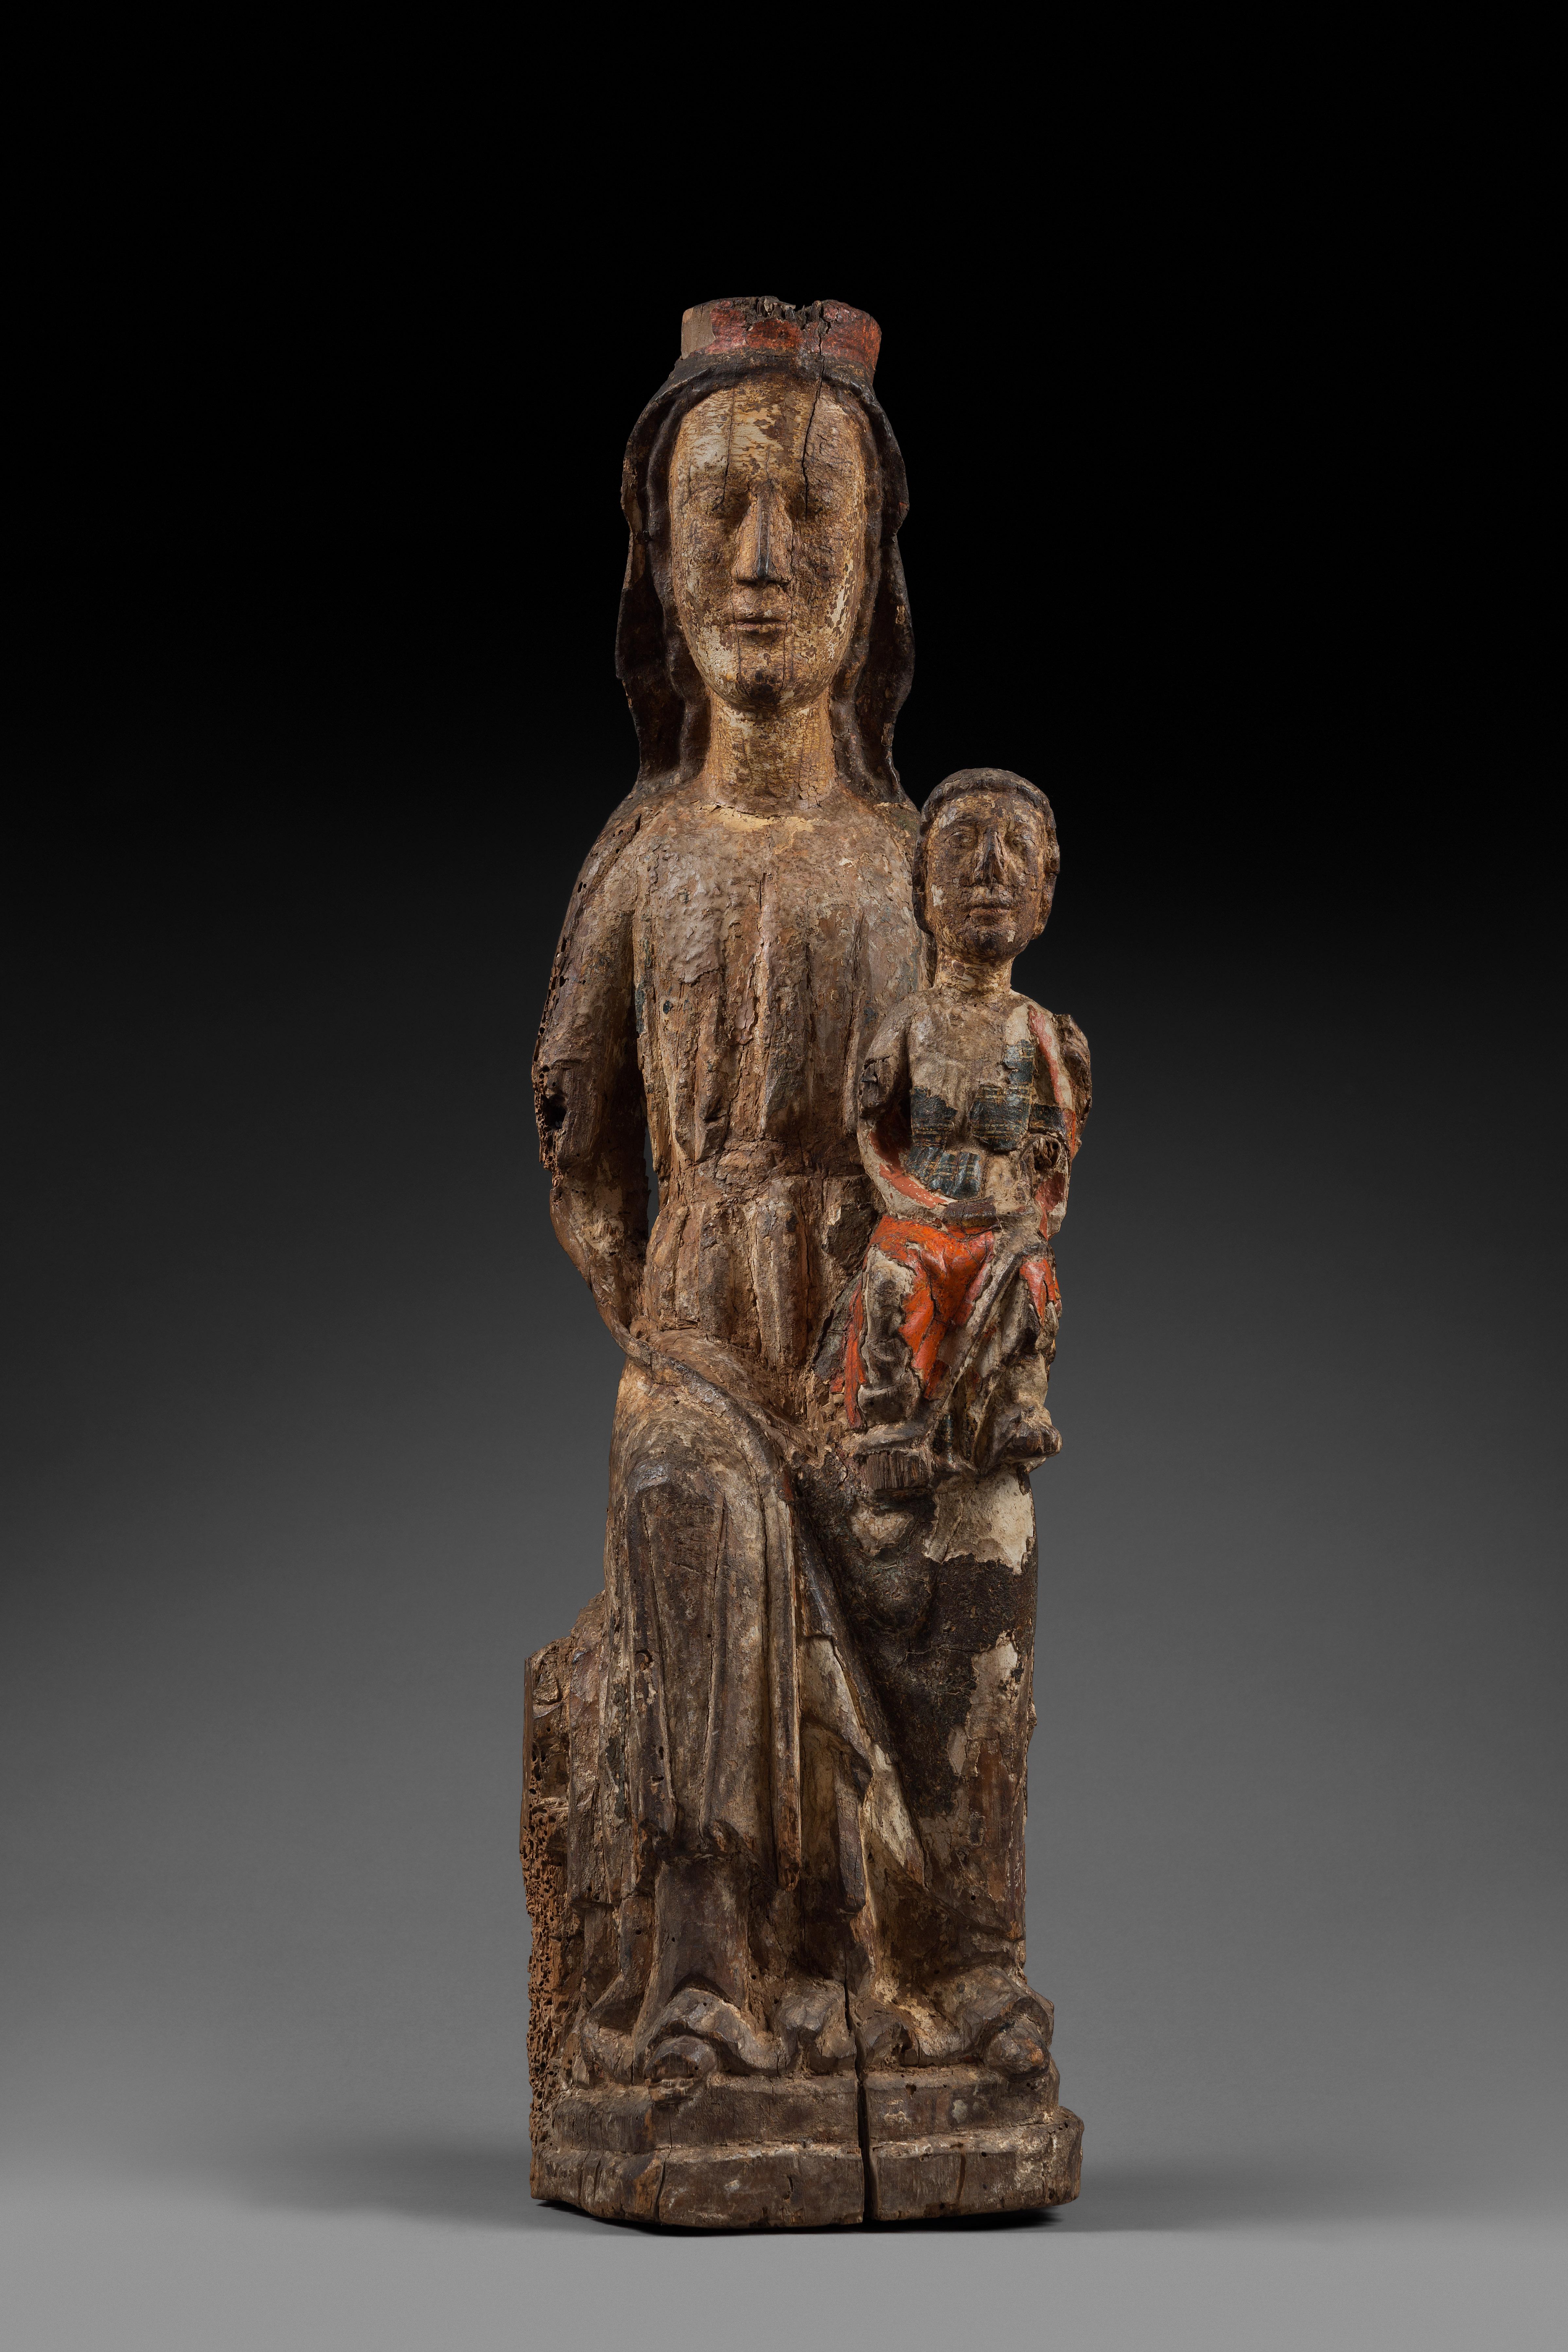 Virgin and child sedes sapientiae, seat of holy wisdom

Origin : Northern Spain, castile, navarre or galicia.
Period : early 13th century.

Height : 85 cm
Length : 23.5 cm
Depth : 19 cm

Important traces of polychromy
Basswood or poplar